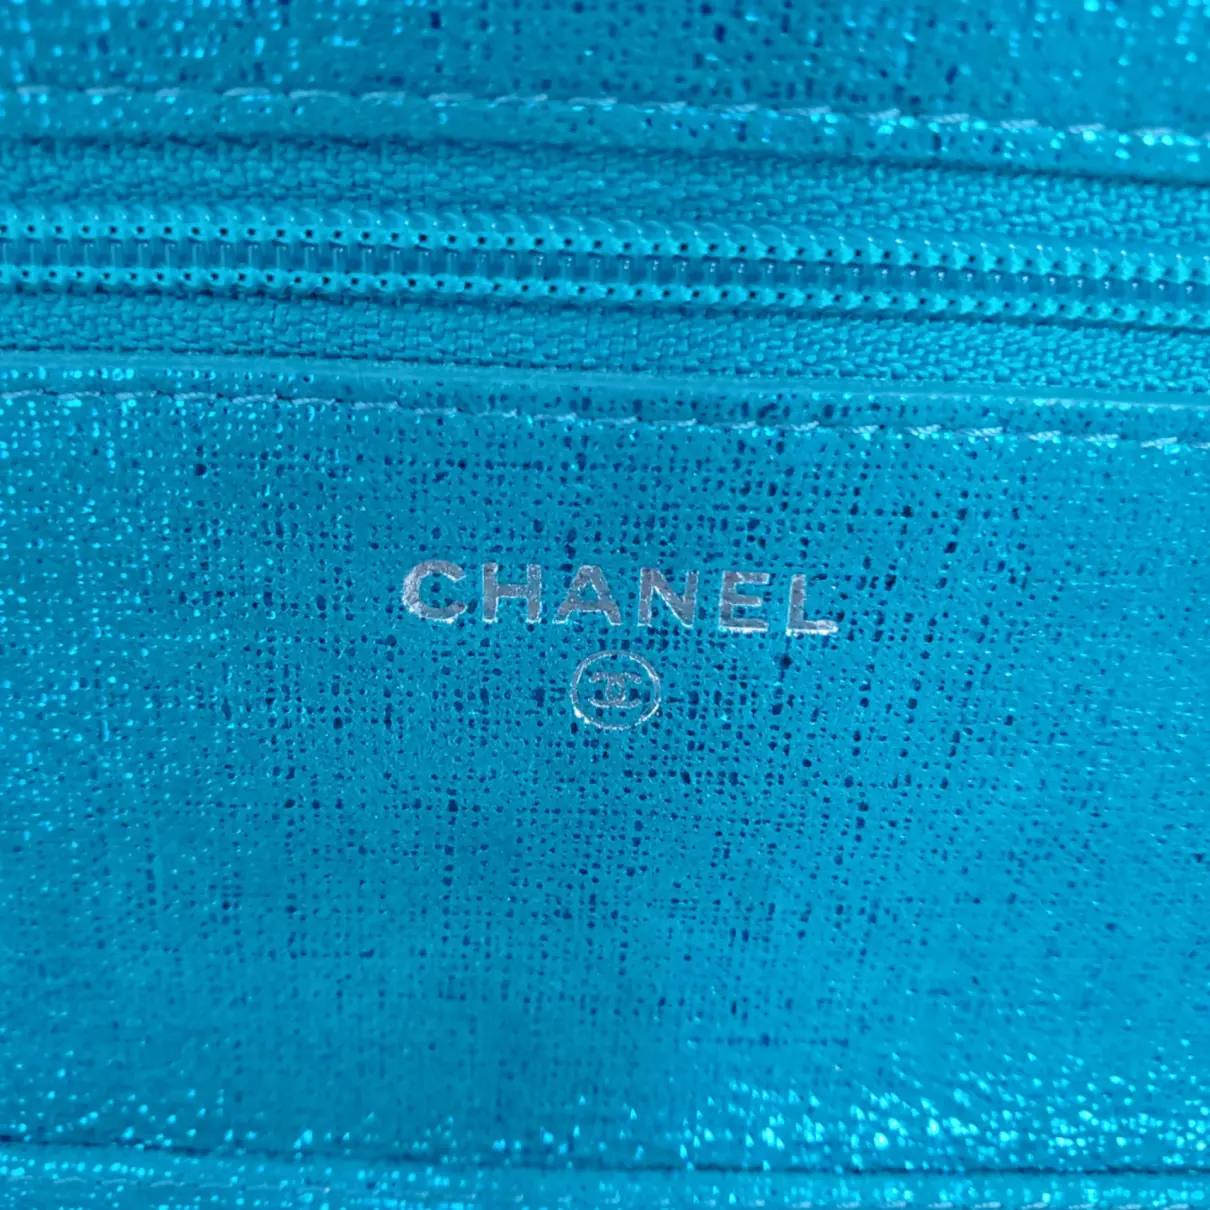 Timeless/classique leather wallet Chanel Turquoise in Leather - 31172639